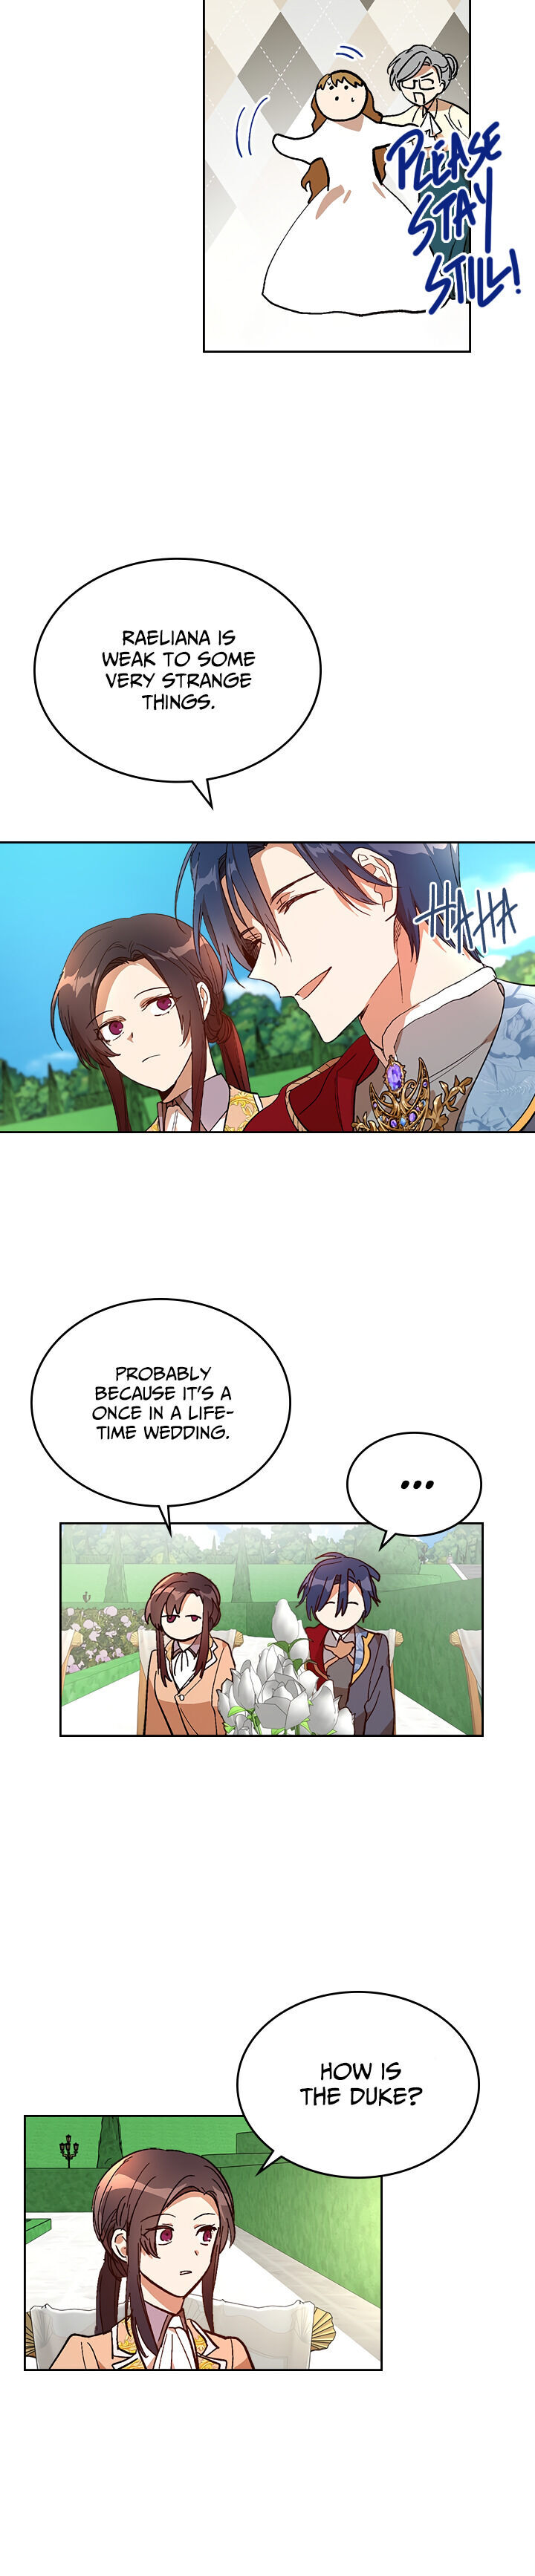 The Reason Why Raeliana Ended up at the Duke's Mansion - Chapter 156 Page 3